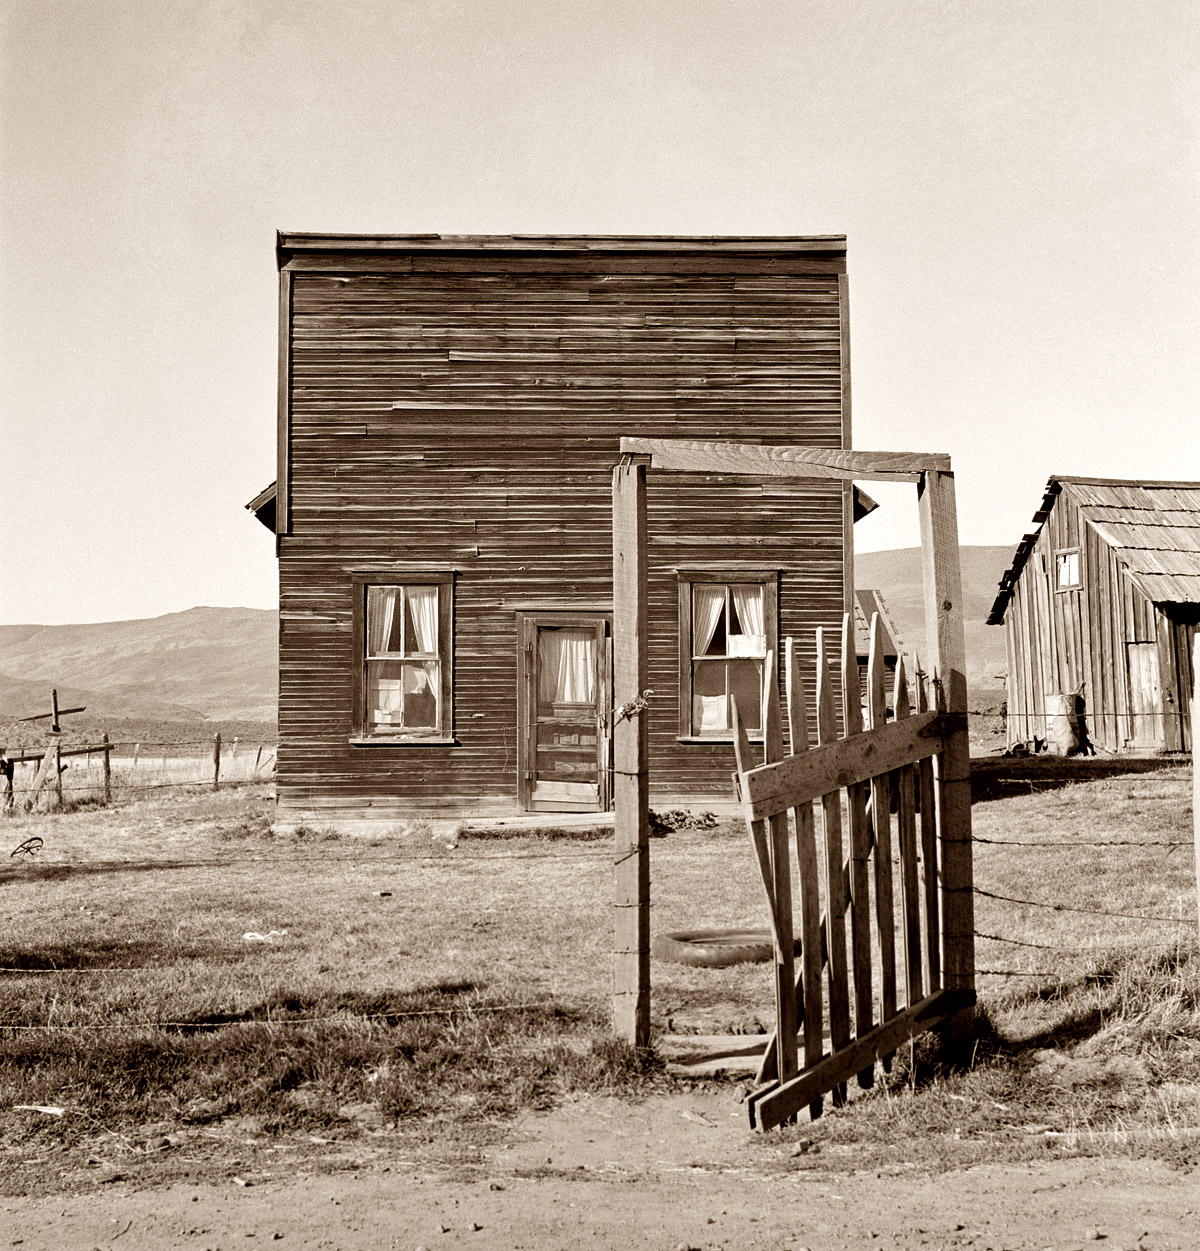 October 1939. Gem County, Idaho. "Former Jackknife saloon and stagecoach tavern,  now the temporary home of a member of the Ola self-help sawmill co-op. Until 1914 the stagecoach used to stop here to change horses and for the refreshment of travelers." Photo by Dorothea Lange. View full size.